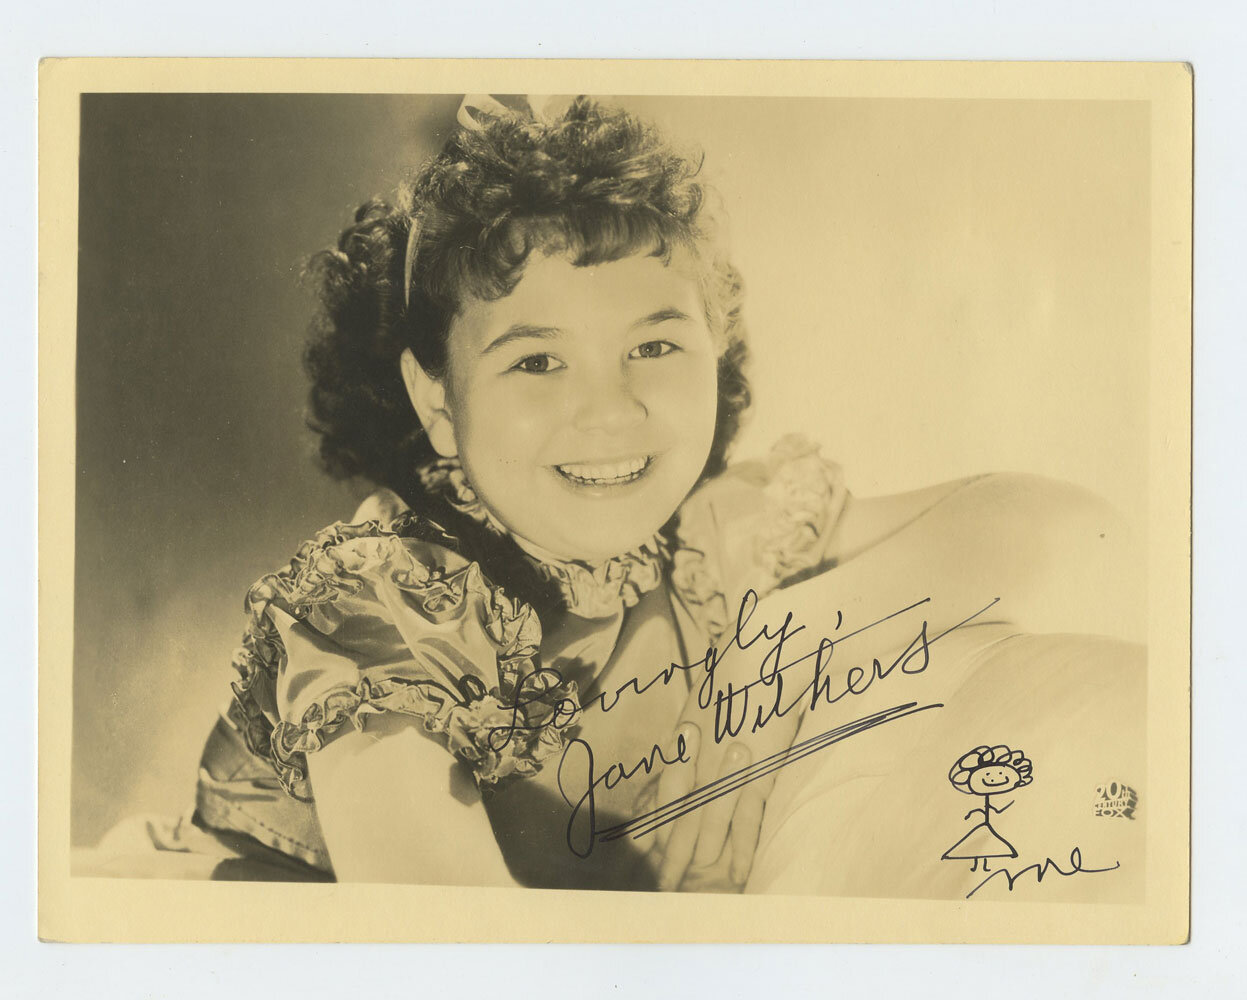 Jane Withers Photo 1937 Autographed inscribed Original Vintage